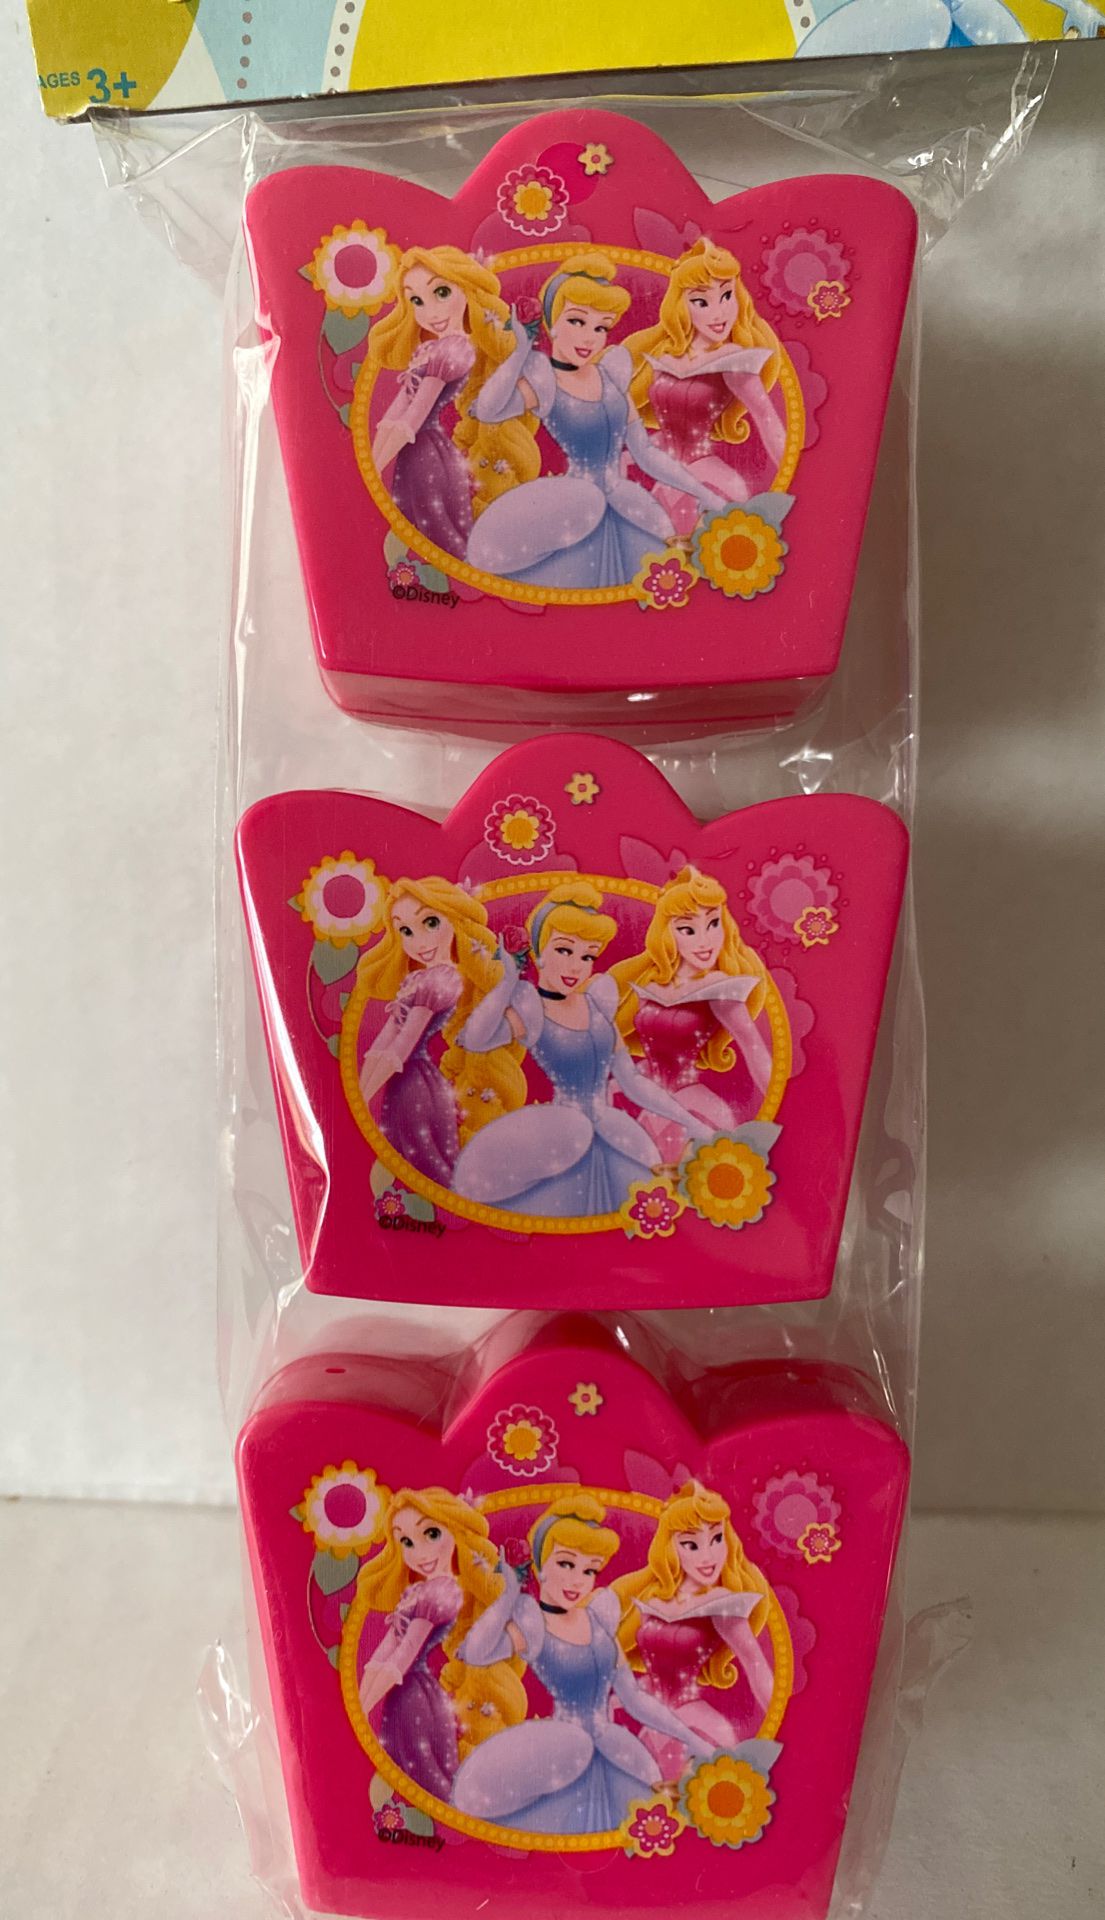 Disney Princess Easter Treat Egg Containers, Brand New in Package